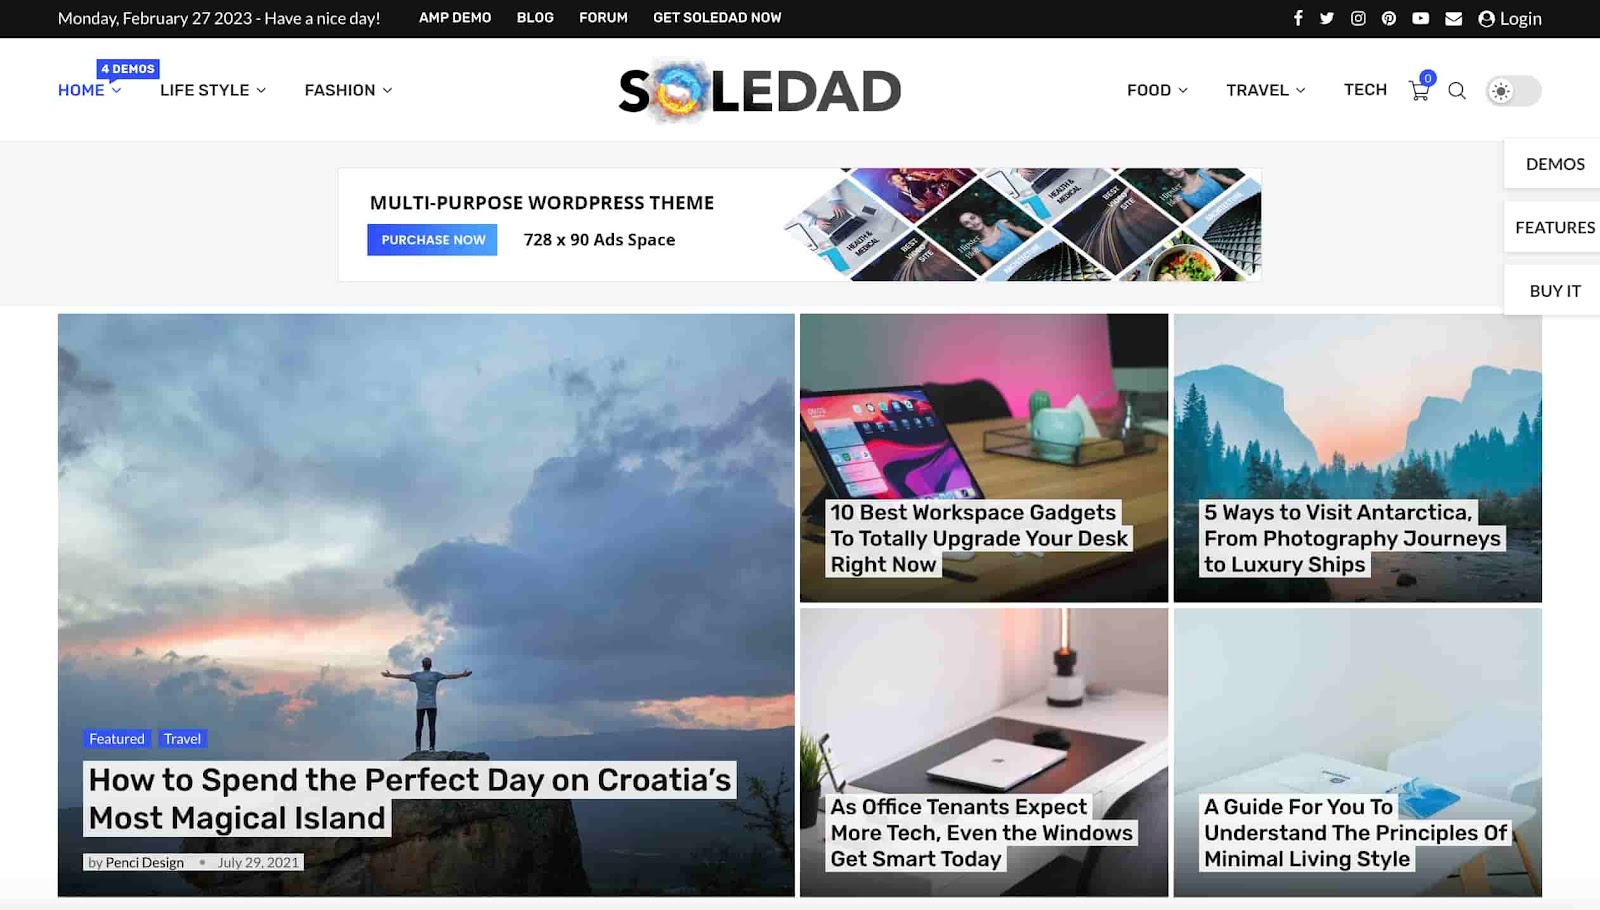 The Soledad WordPress theme features a sticky menu